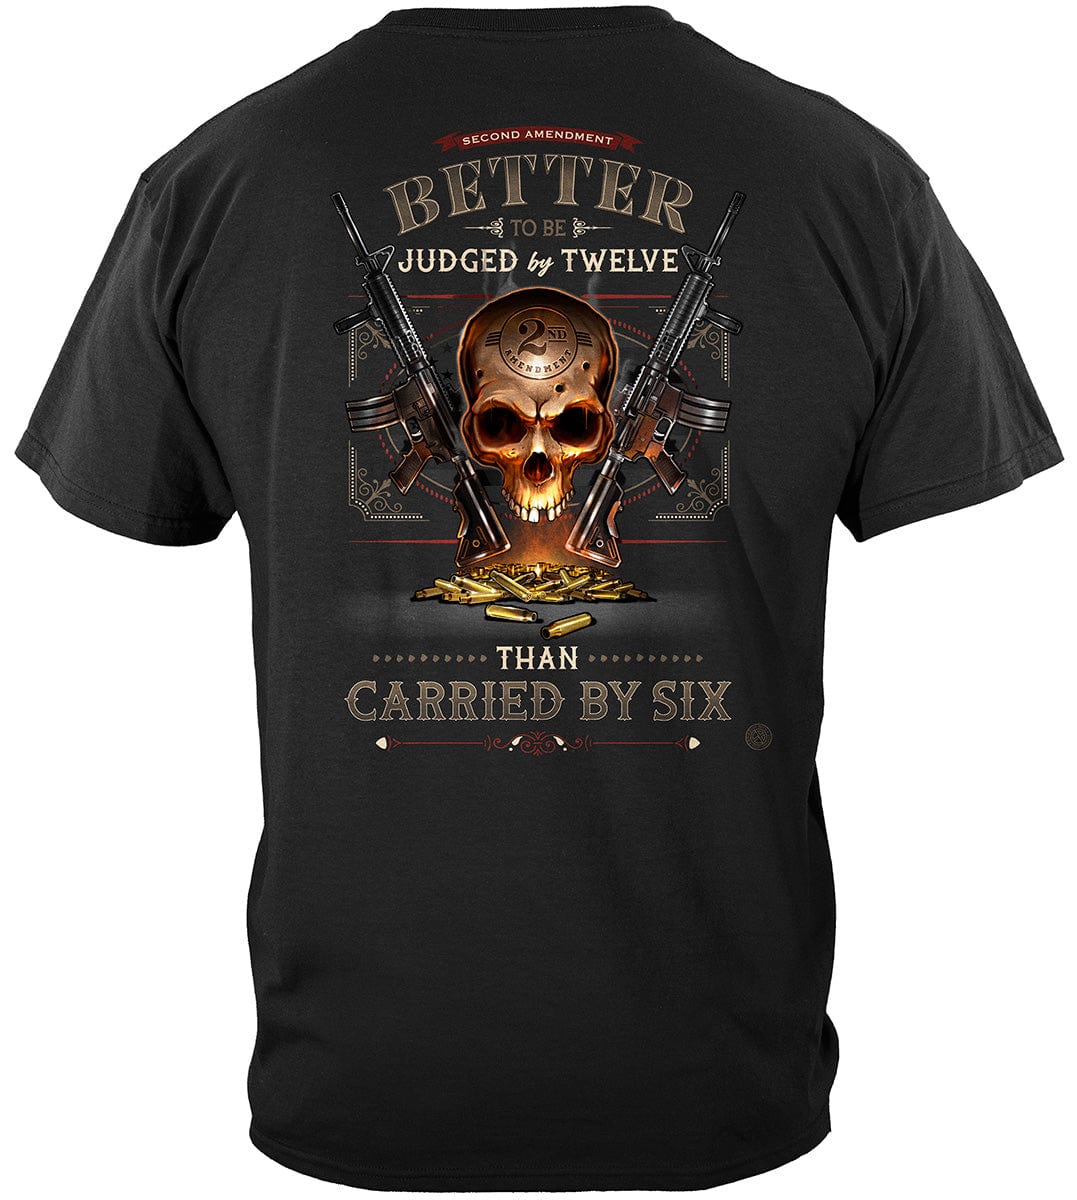 2A Judged By 12 than Carried By 6 Premium T-SHIRT